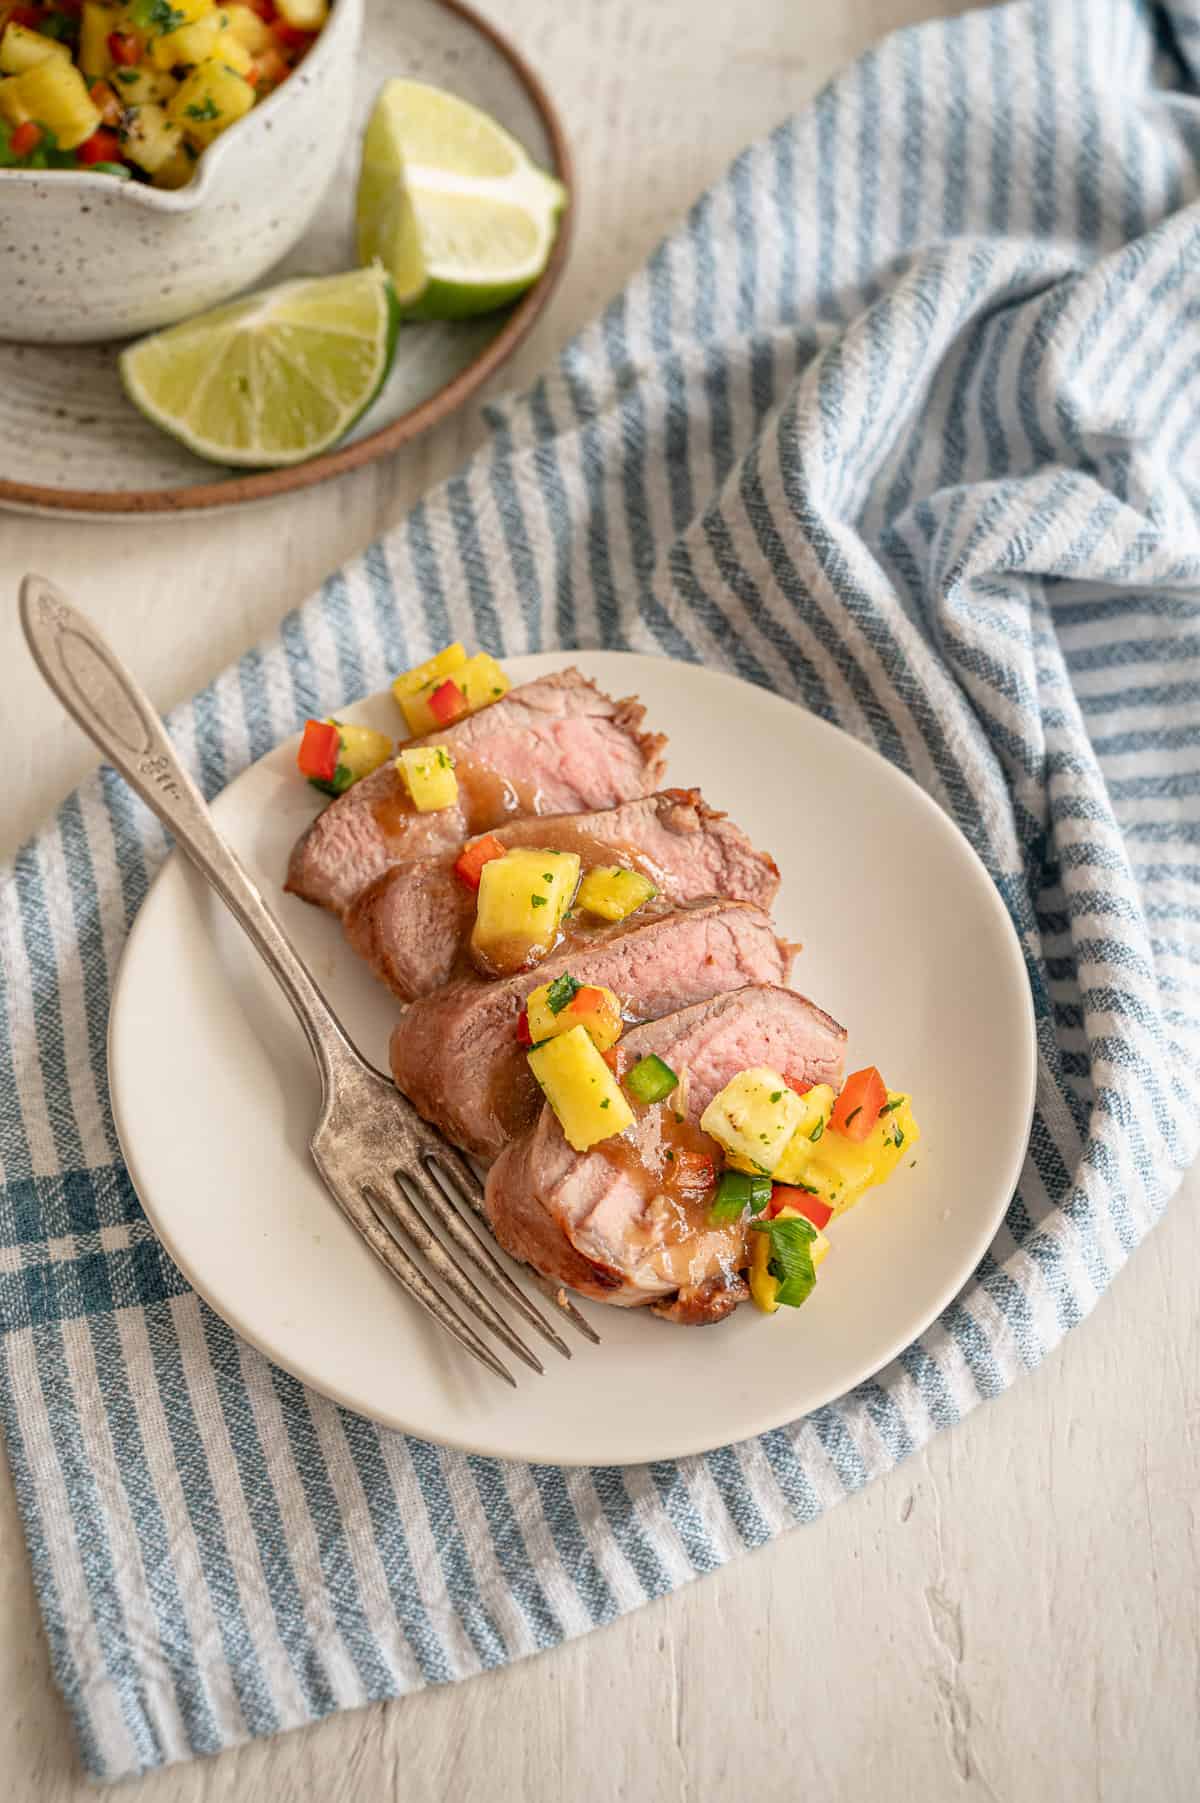 Slices of grilled pork tenderloin on a white plate with pineapple salsa and sauce drizzle on top.